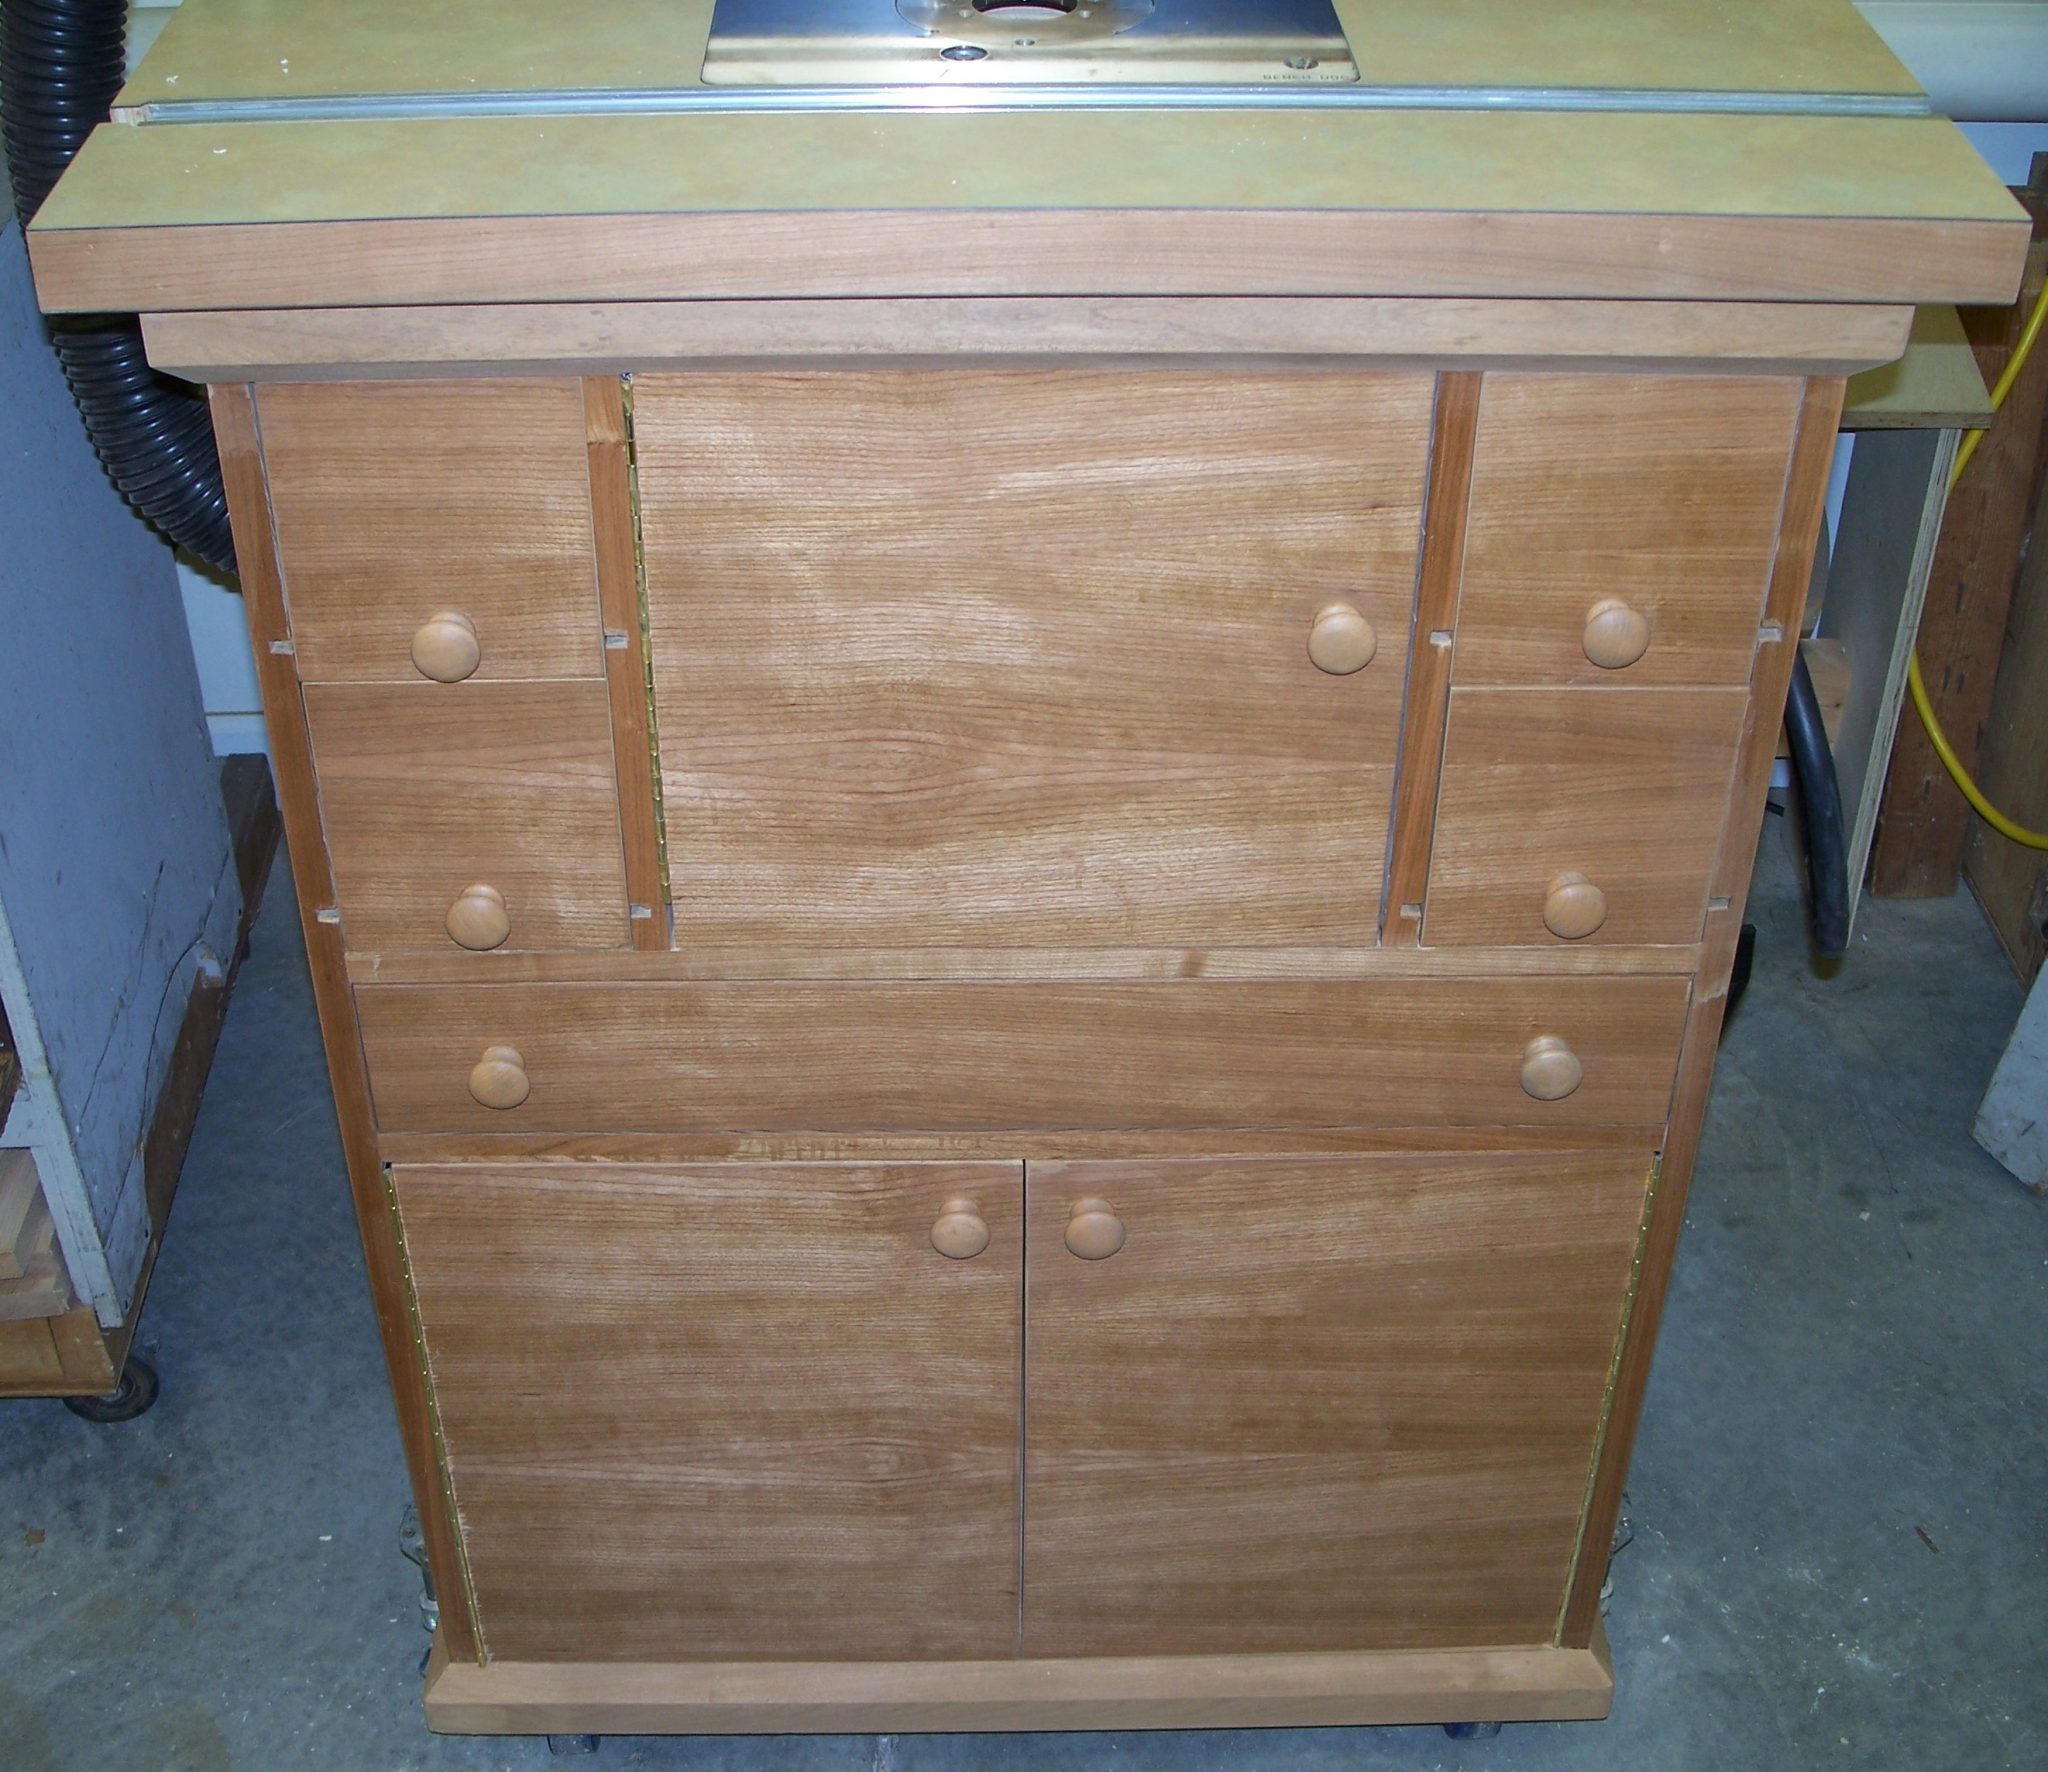 Cherry Plywood Cabinet / Router Table with bit and accessory storage